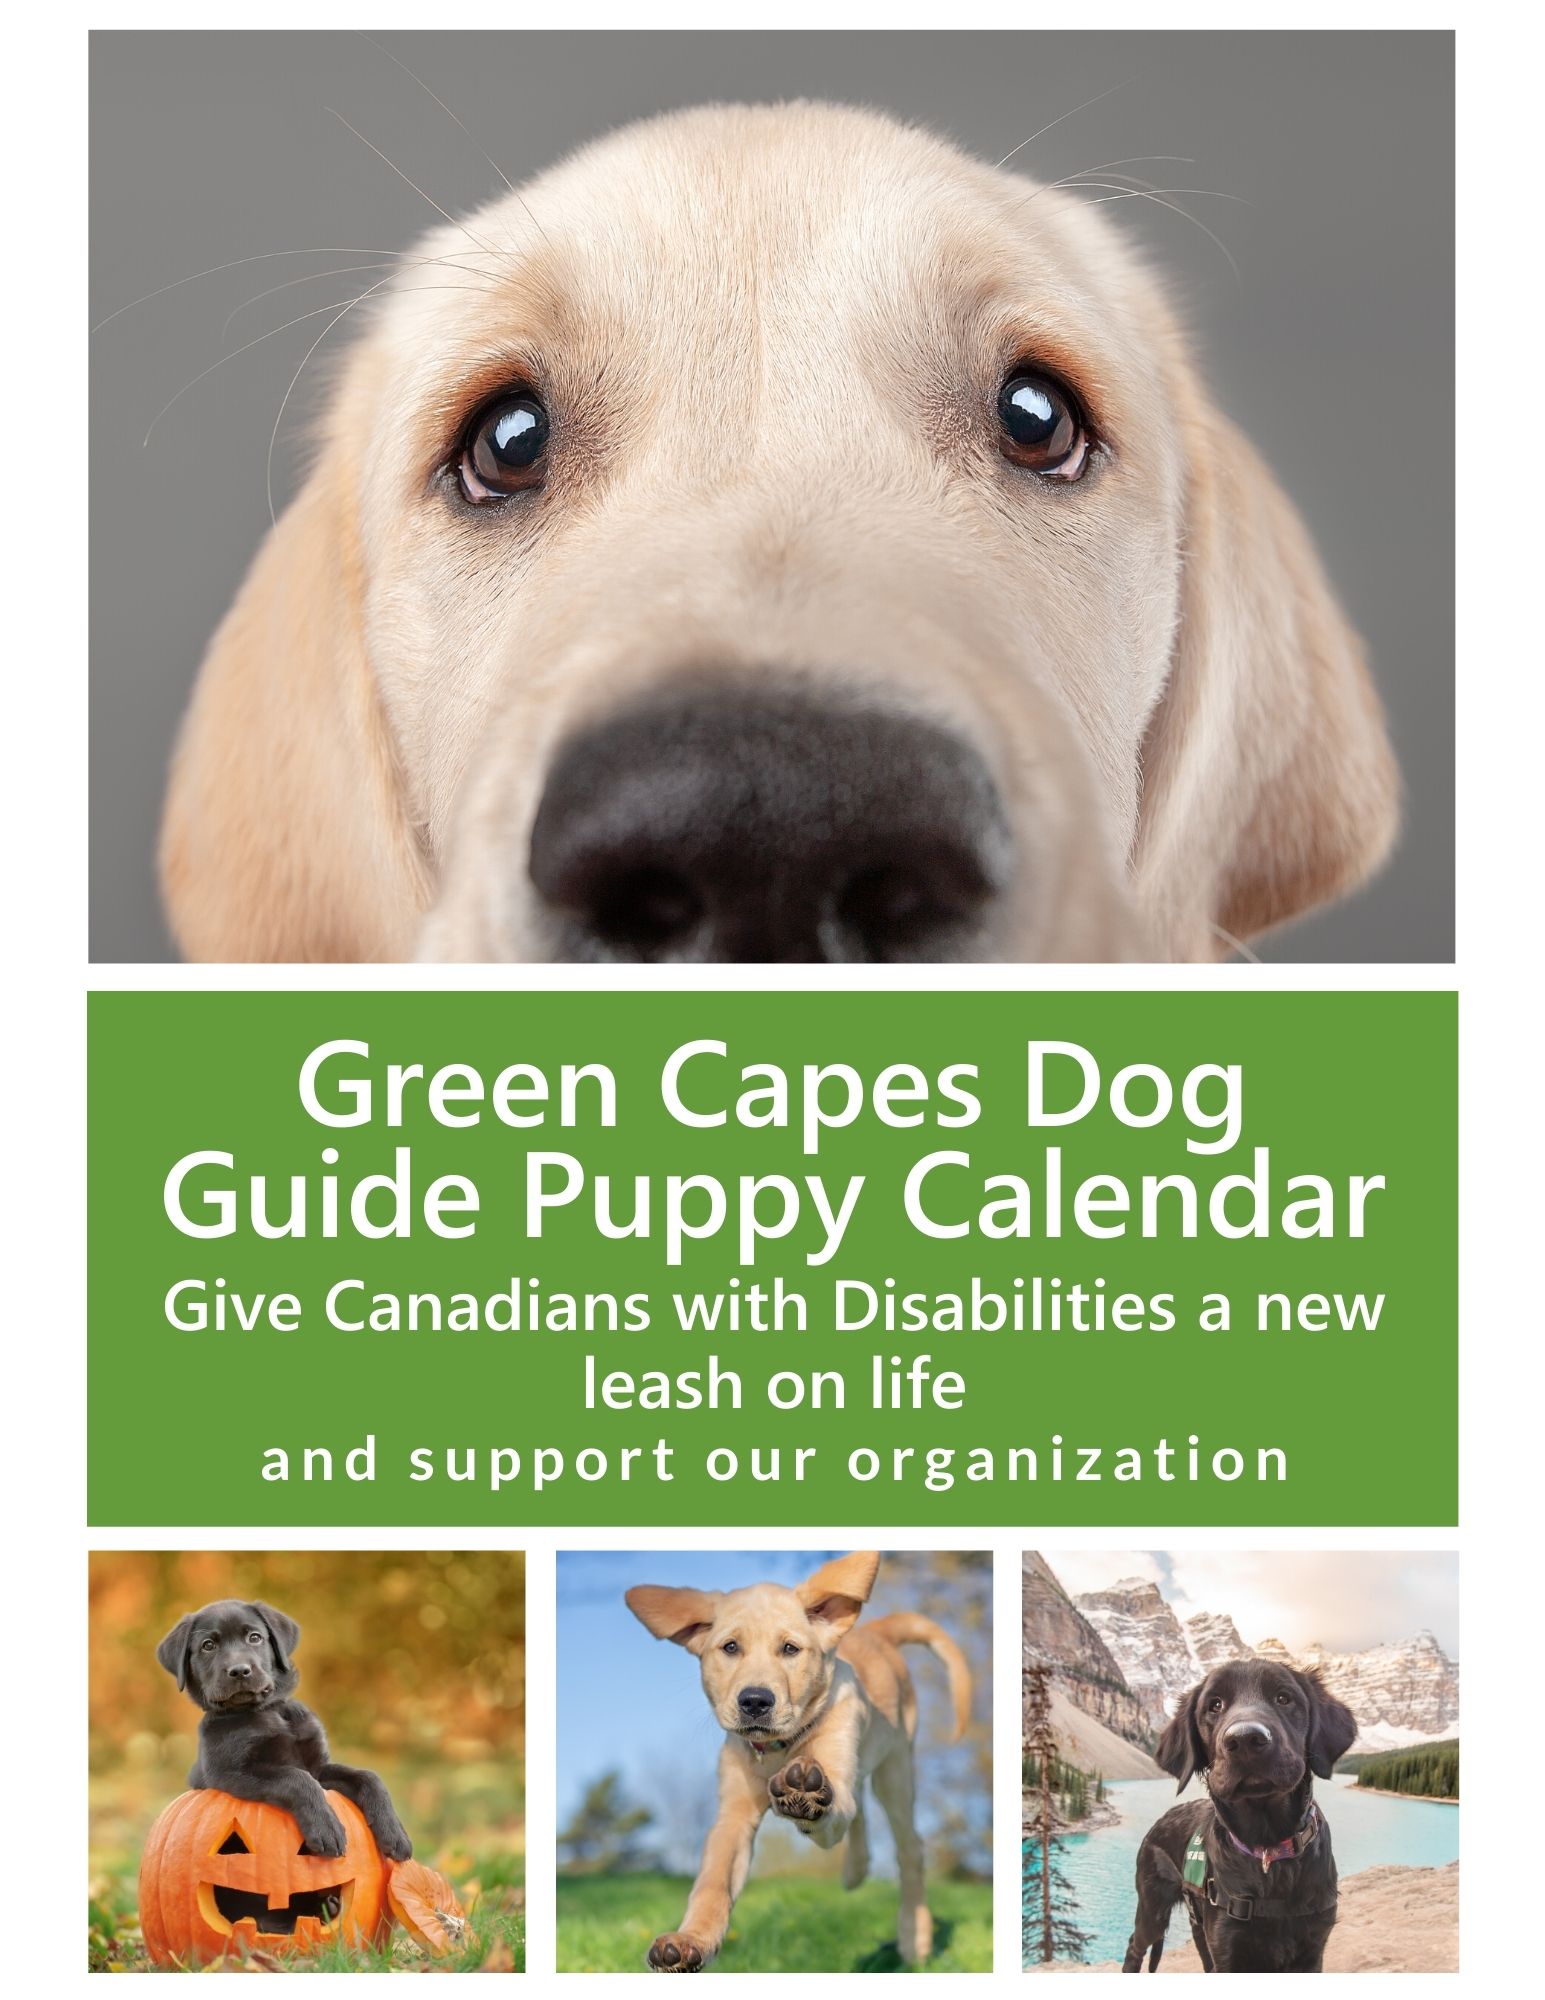 Yellow Lab Puppy beside text that says Dog Guide Puppy Calendar